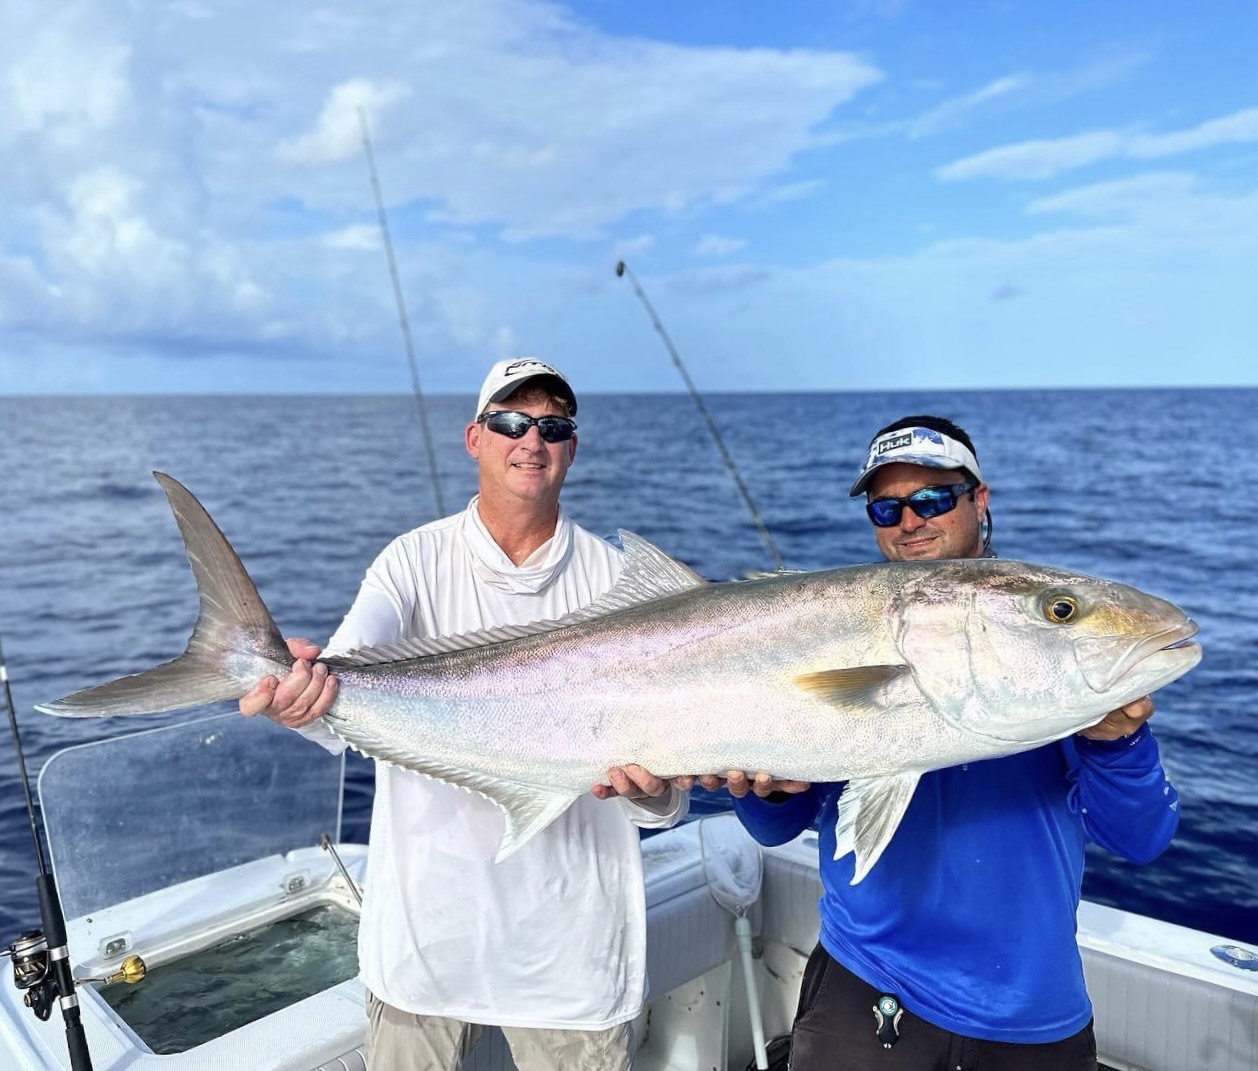 THE ANGLER'S OUTLOOK: AMBERJACKS MAKE FOR AN UNFORGETTABLE FIGHT THIS SUMMER